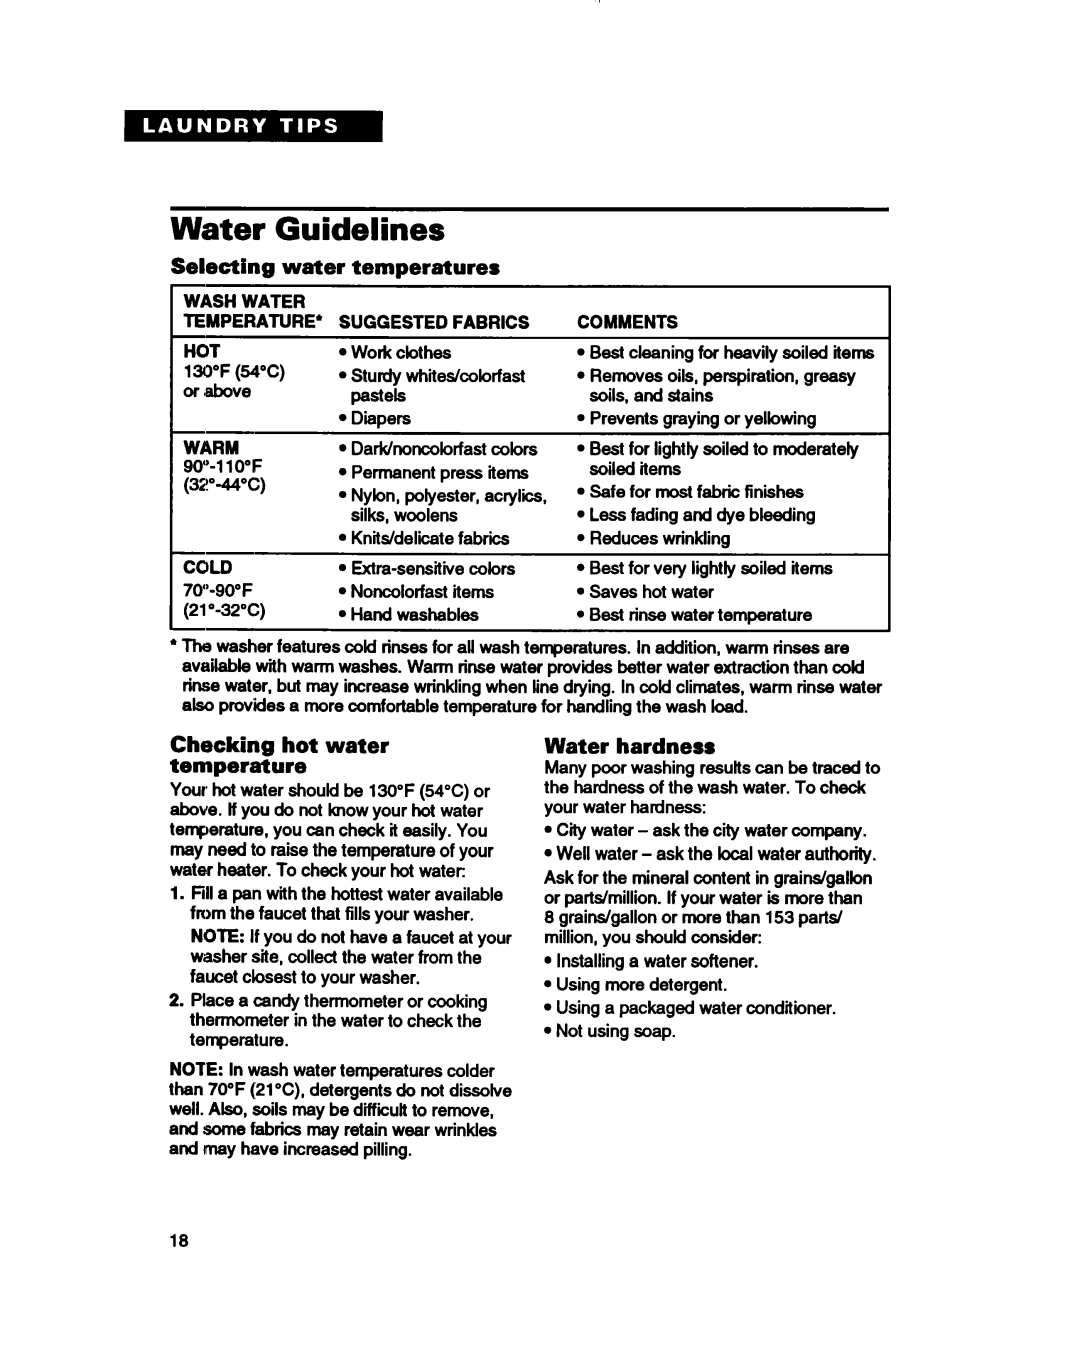 Whirlpool 3396314 warranty Water Guidelines, Selectlng water temperatures, Checking hot water temperature, Water hardness 